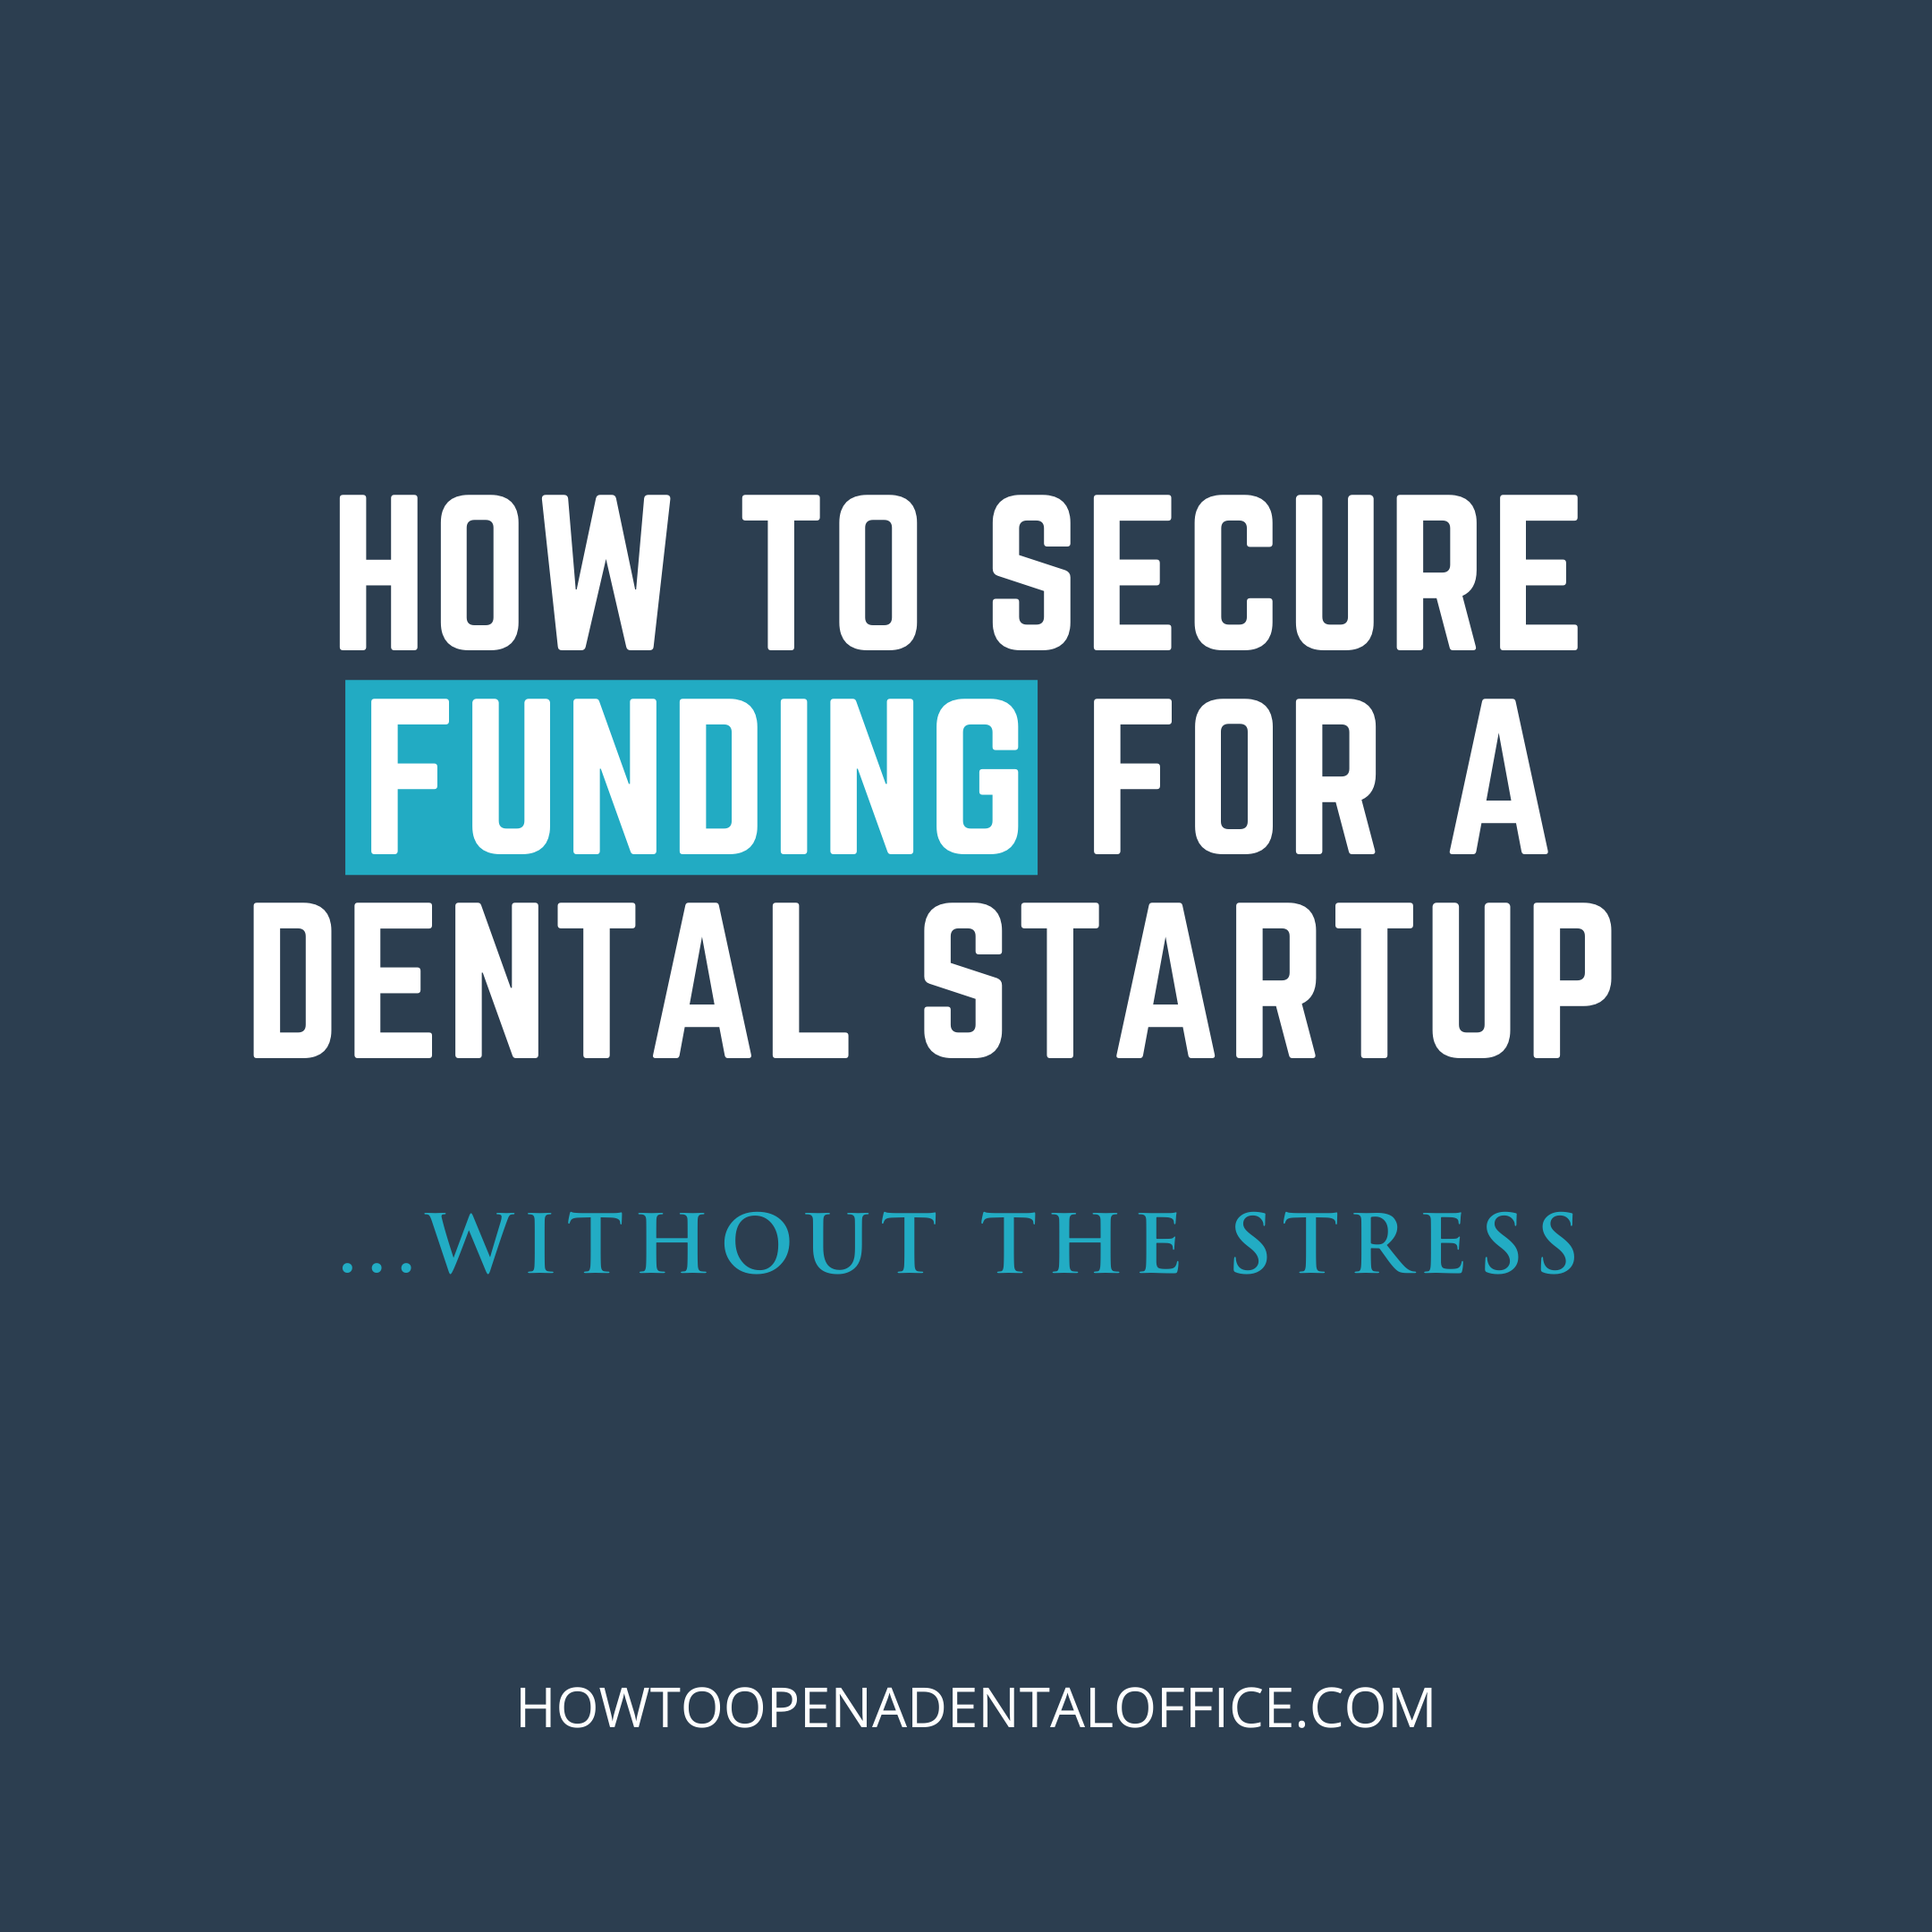 How to Secure Funding for a Dental Startup Without the Stress